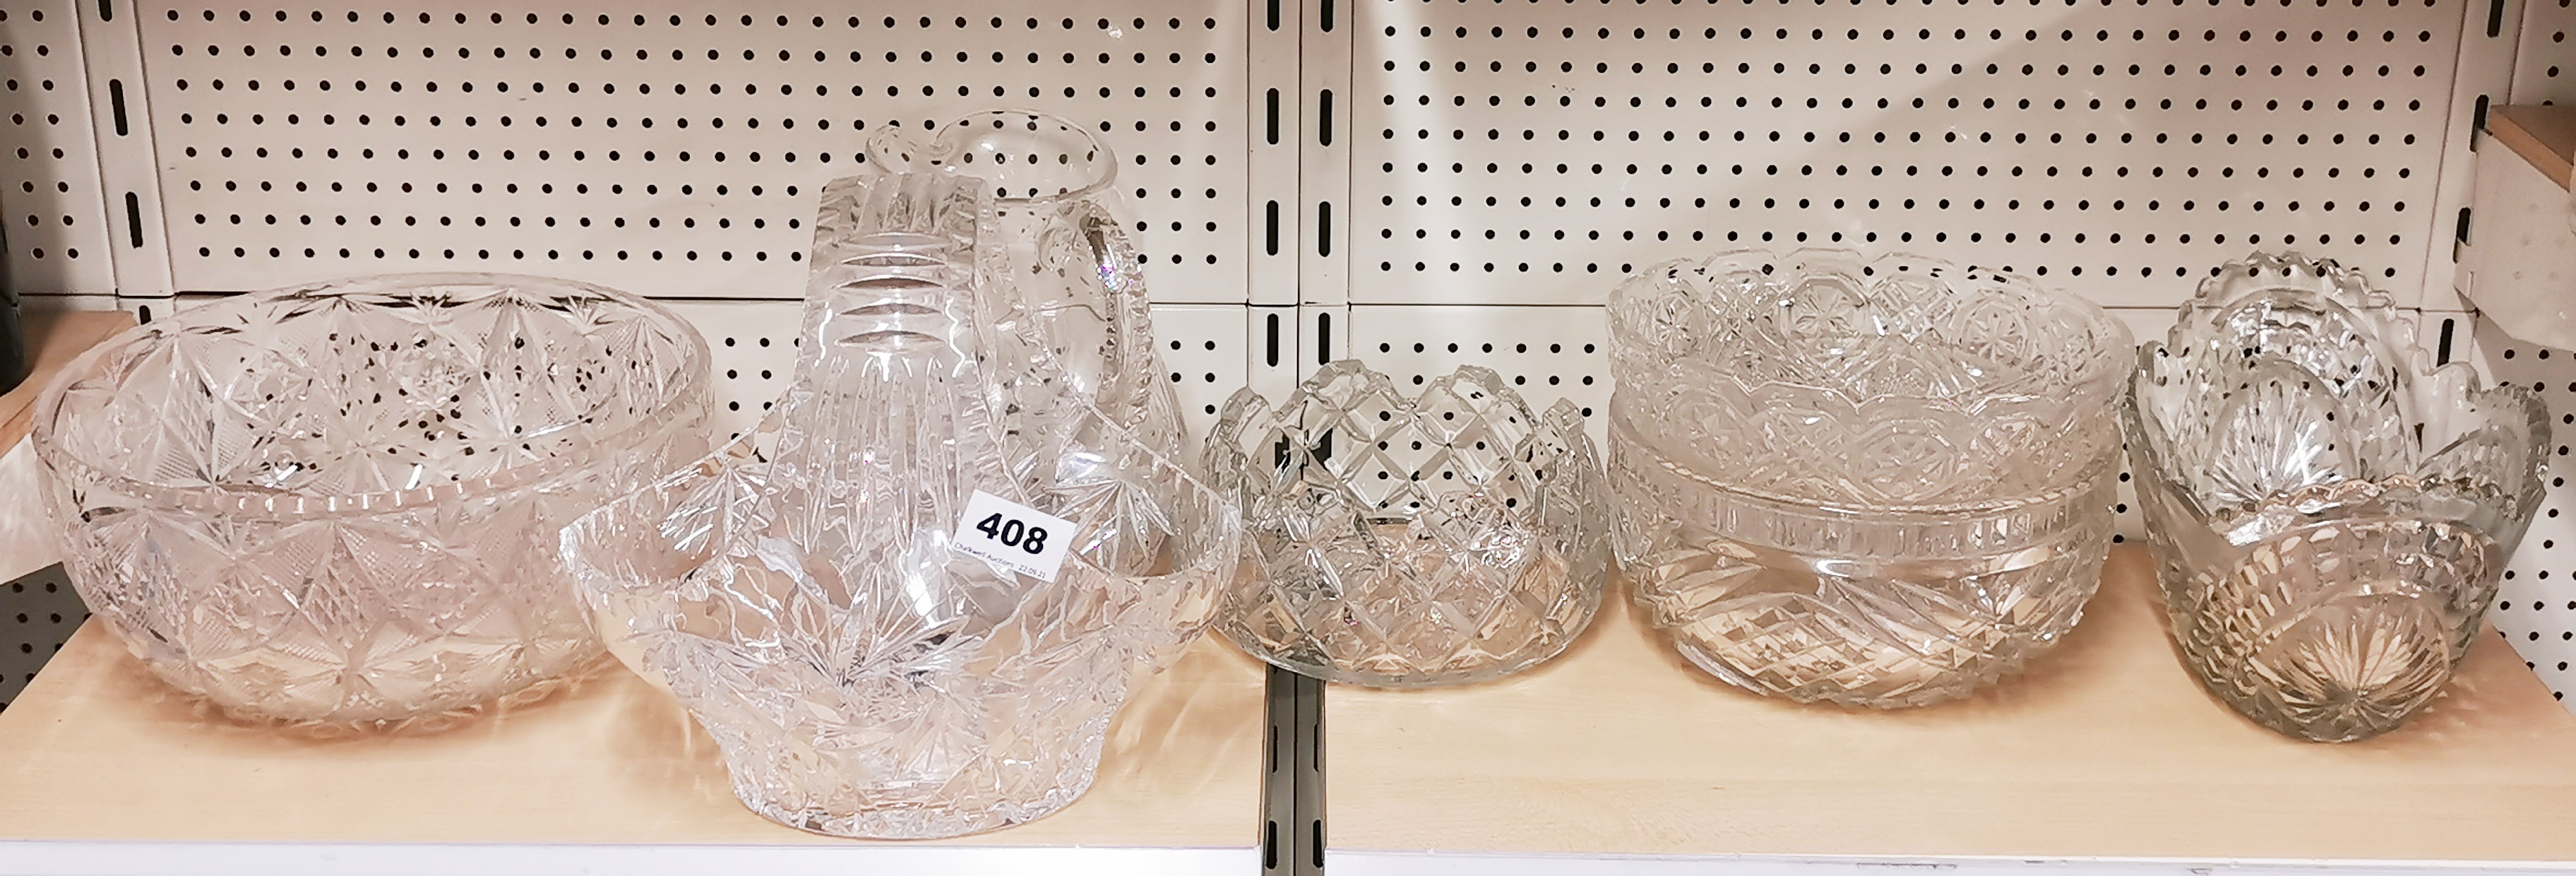 A group of good glass items